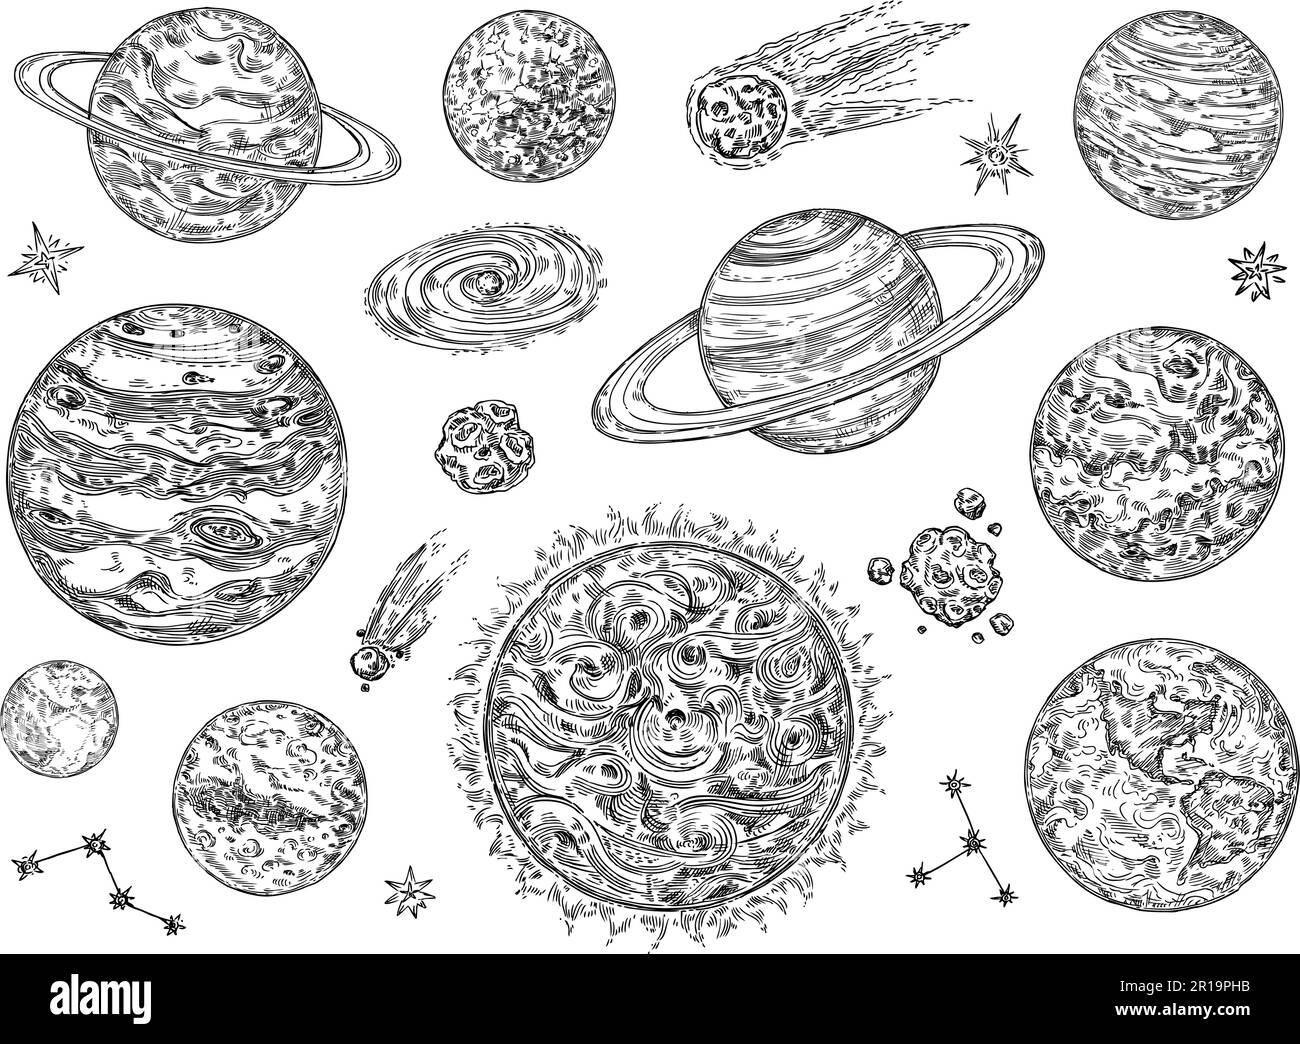 Sketch solar system planets. Hand drawn comet, moon, star, galaxy and space objects vector illustration set Stock Vector